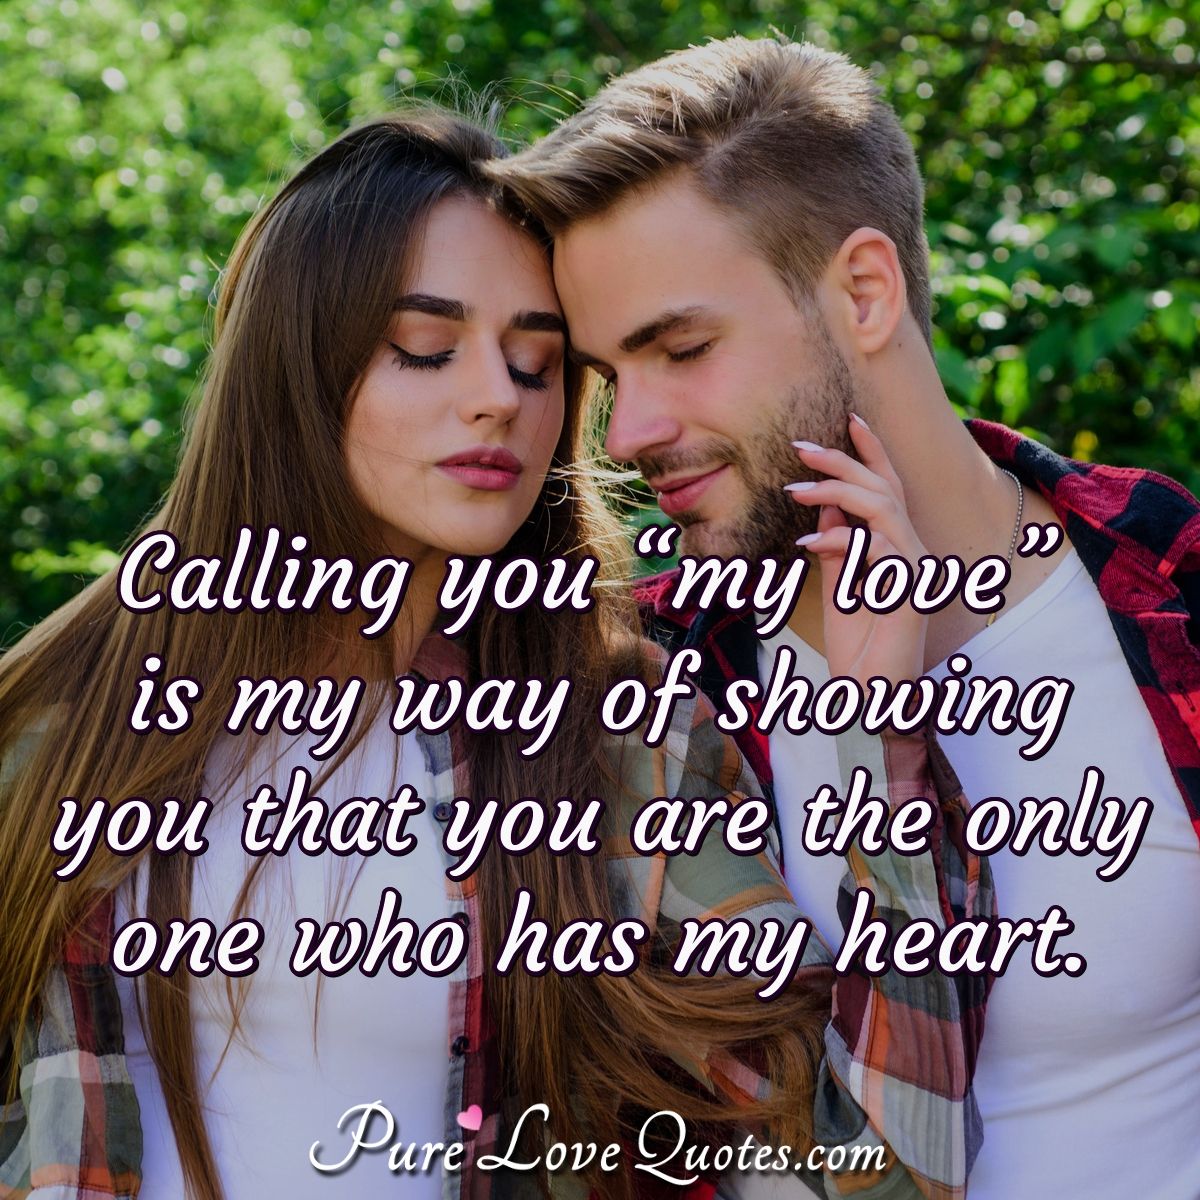 Calling you “my love” is my way of showing you that you are the ...